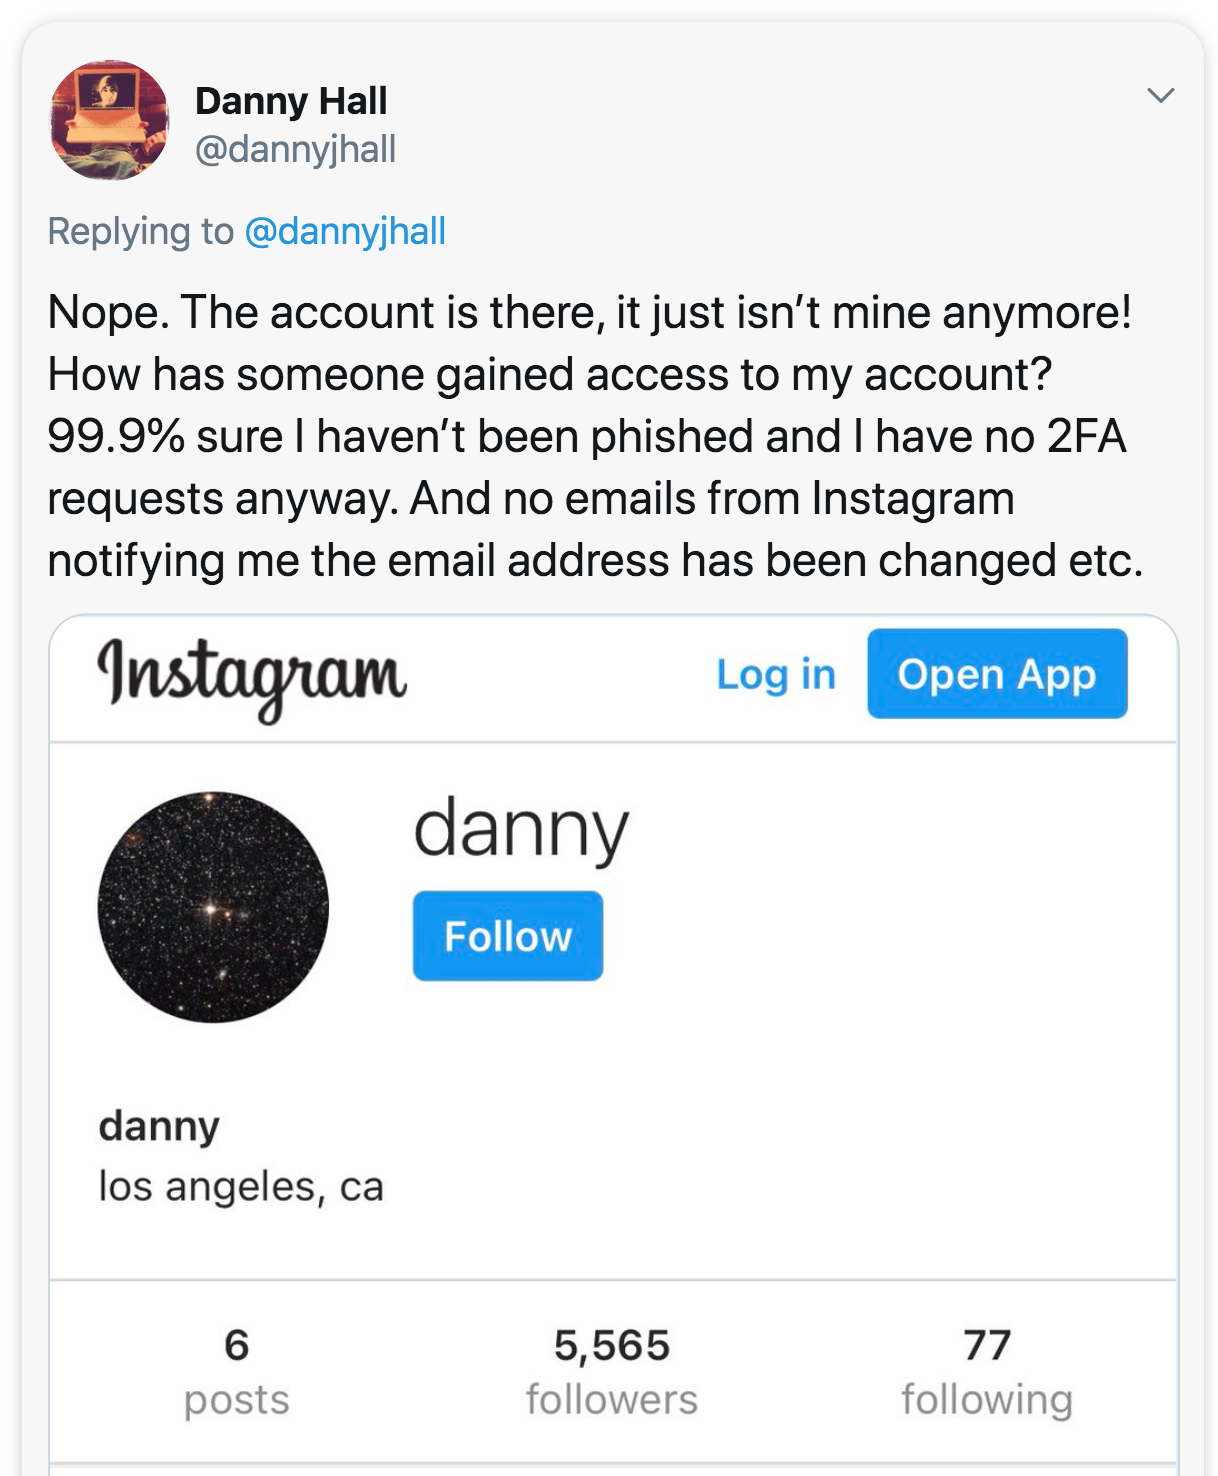 web page - Danny Hall Nope. The account is there, it just isn't mine anymore! How has someone gained access to my account? 99.9% sure I haven't been phished and I have no 2FA requests anyway. And no emails from Instagram notifying me the email address has